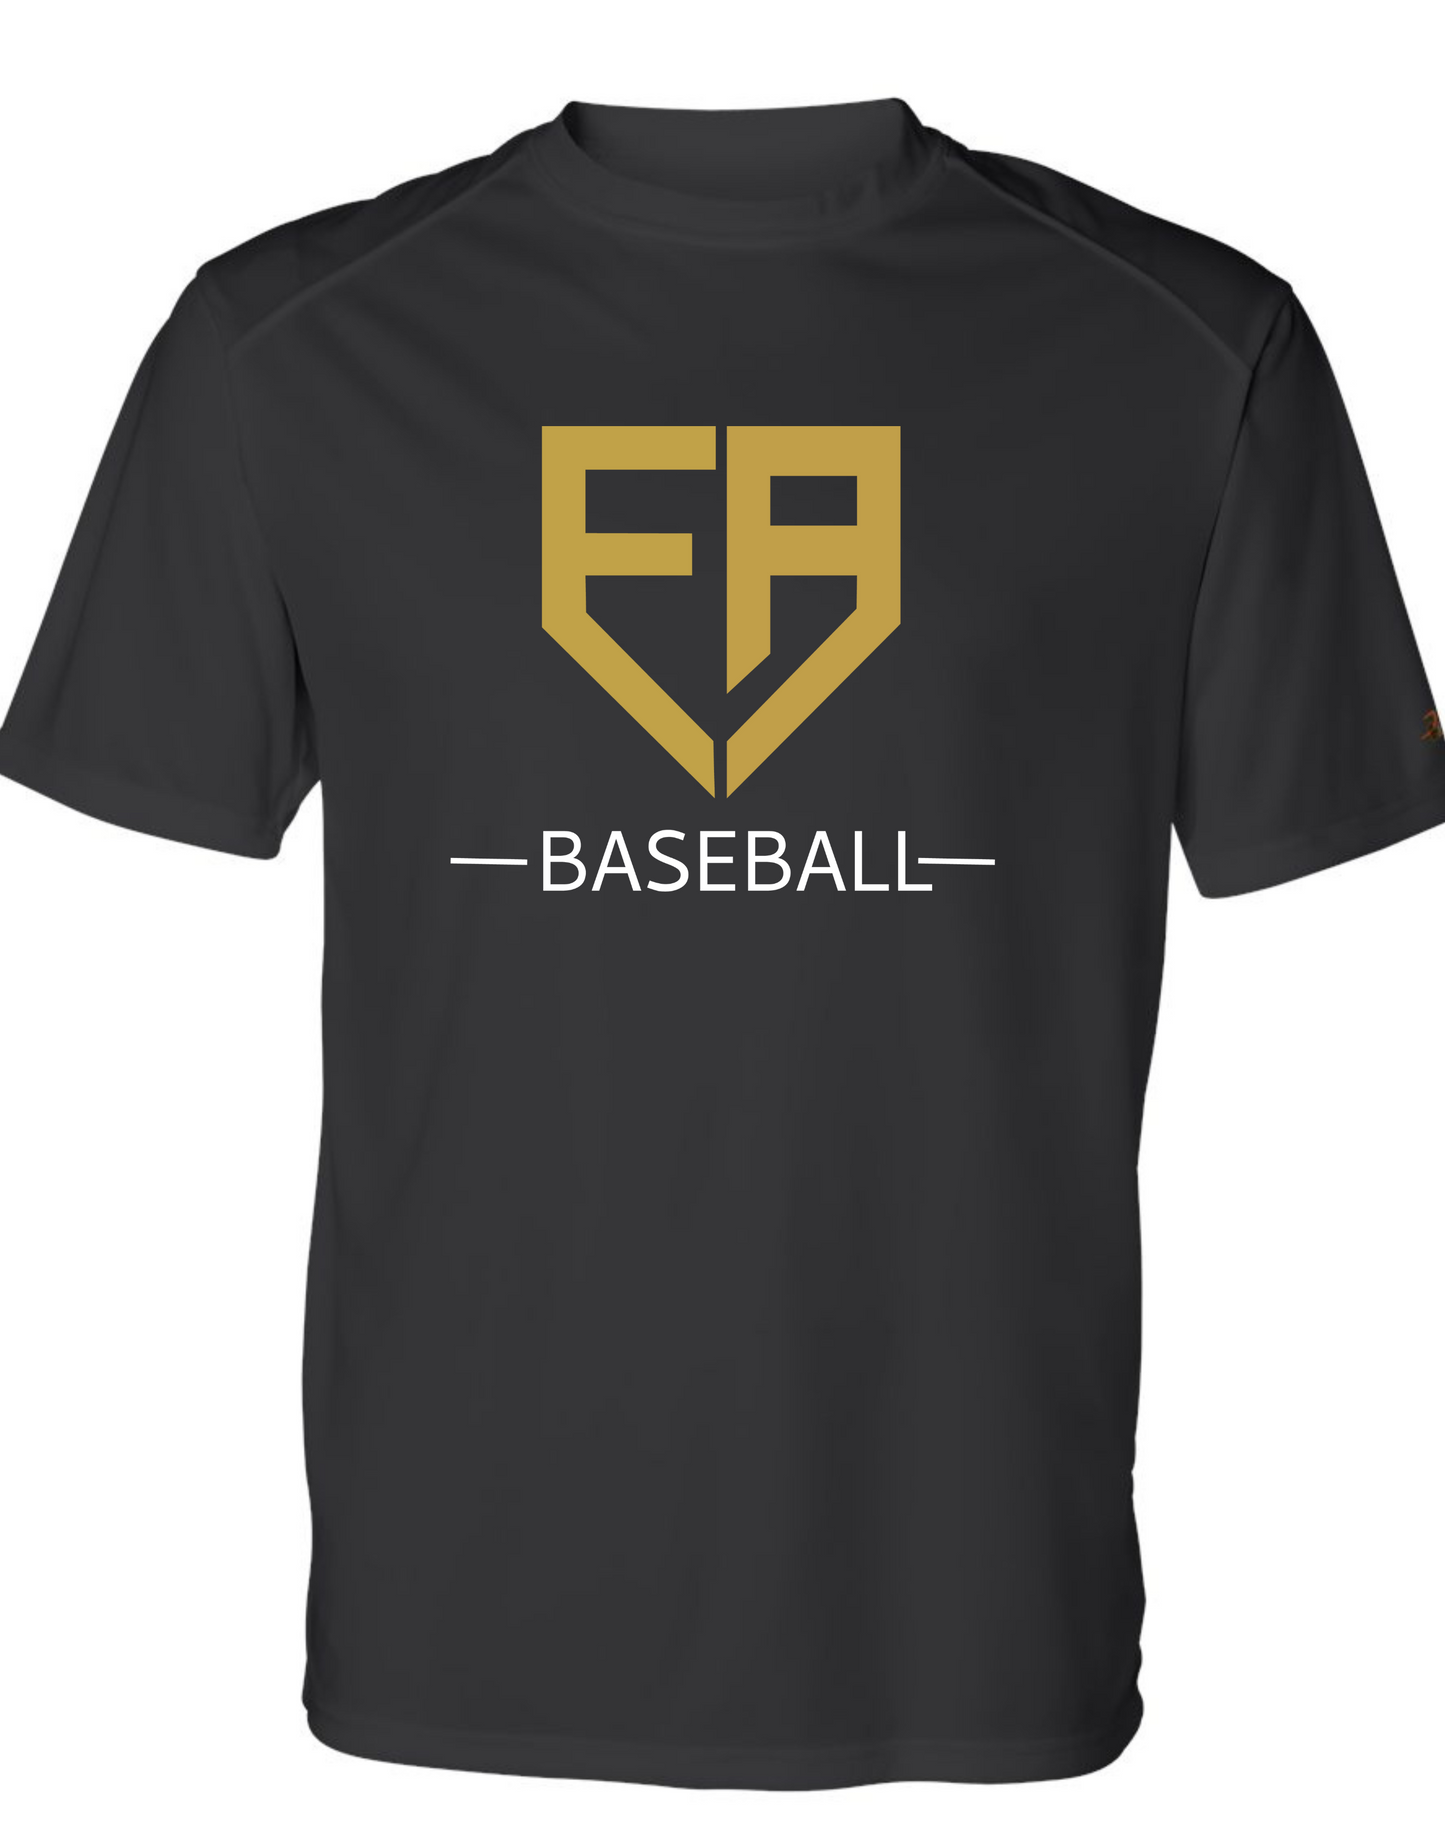 ADULT/YOUTH Dri-Fit SHORT SLEEVE - Front Design Only